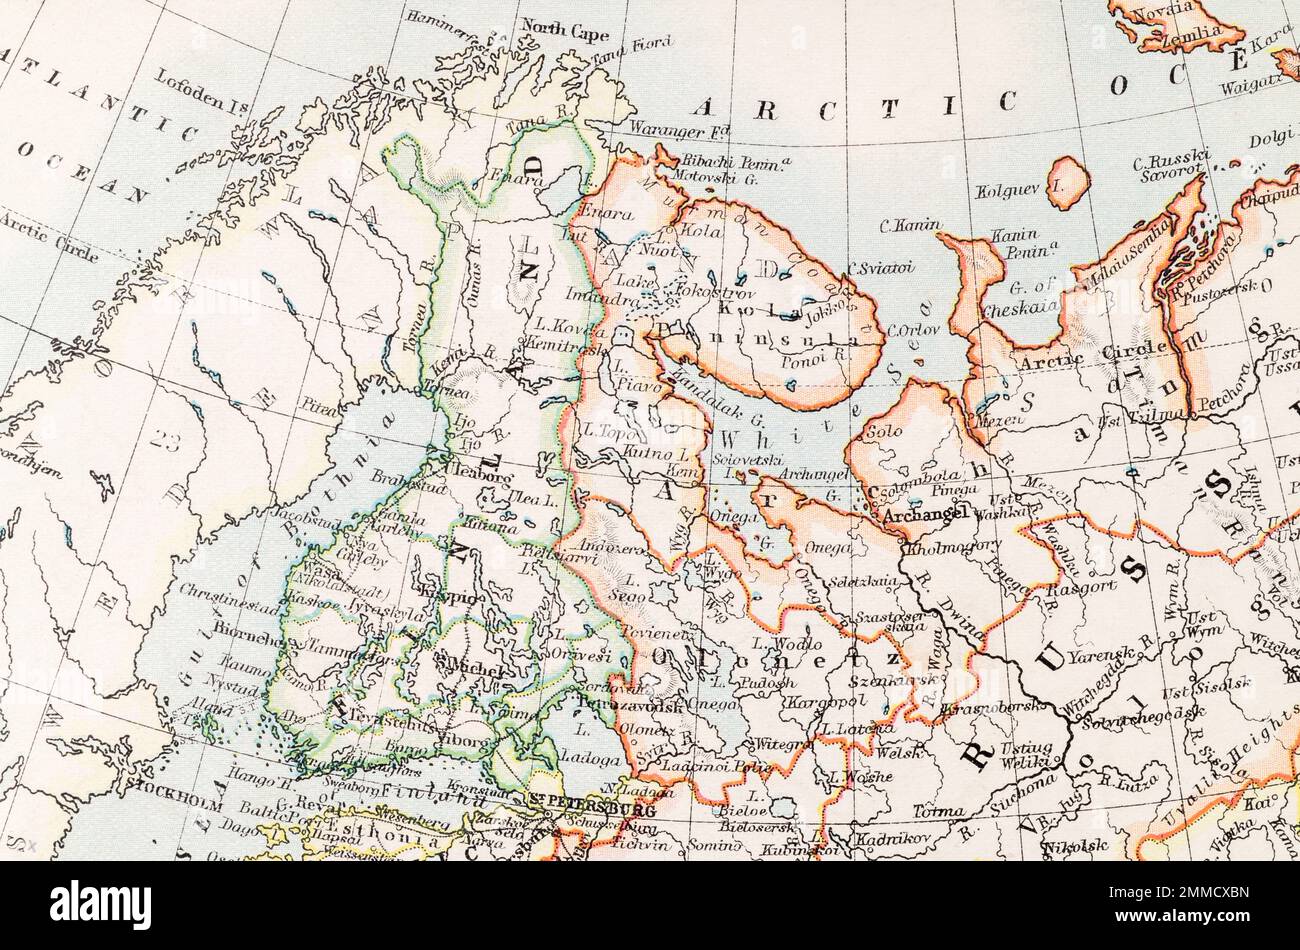 1897 Atlas map of Finland and surrounding Baltic states. For Finland territory changes, Finland borders, Russia-Finland relations & hostility. Stock Photo